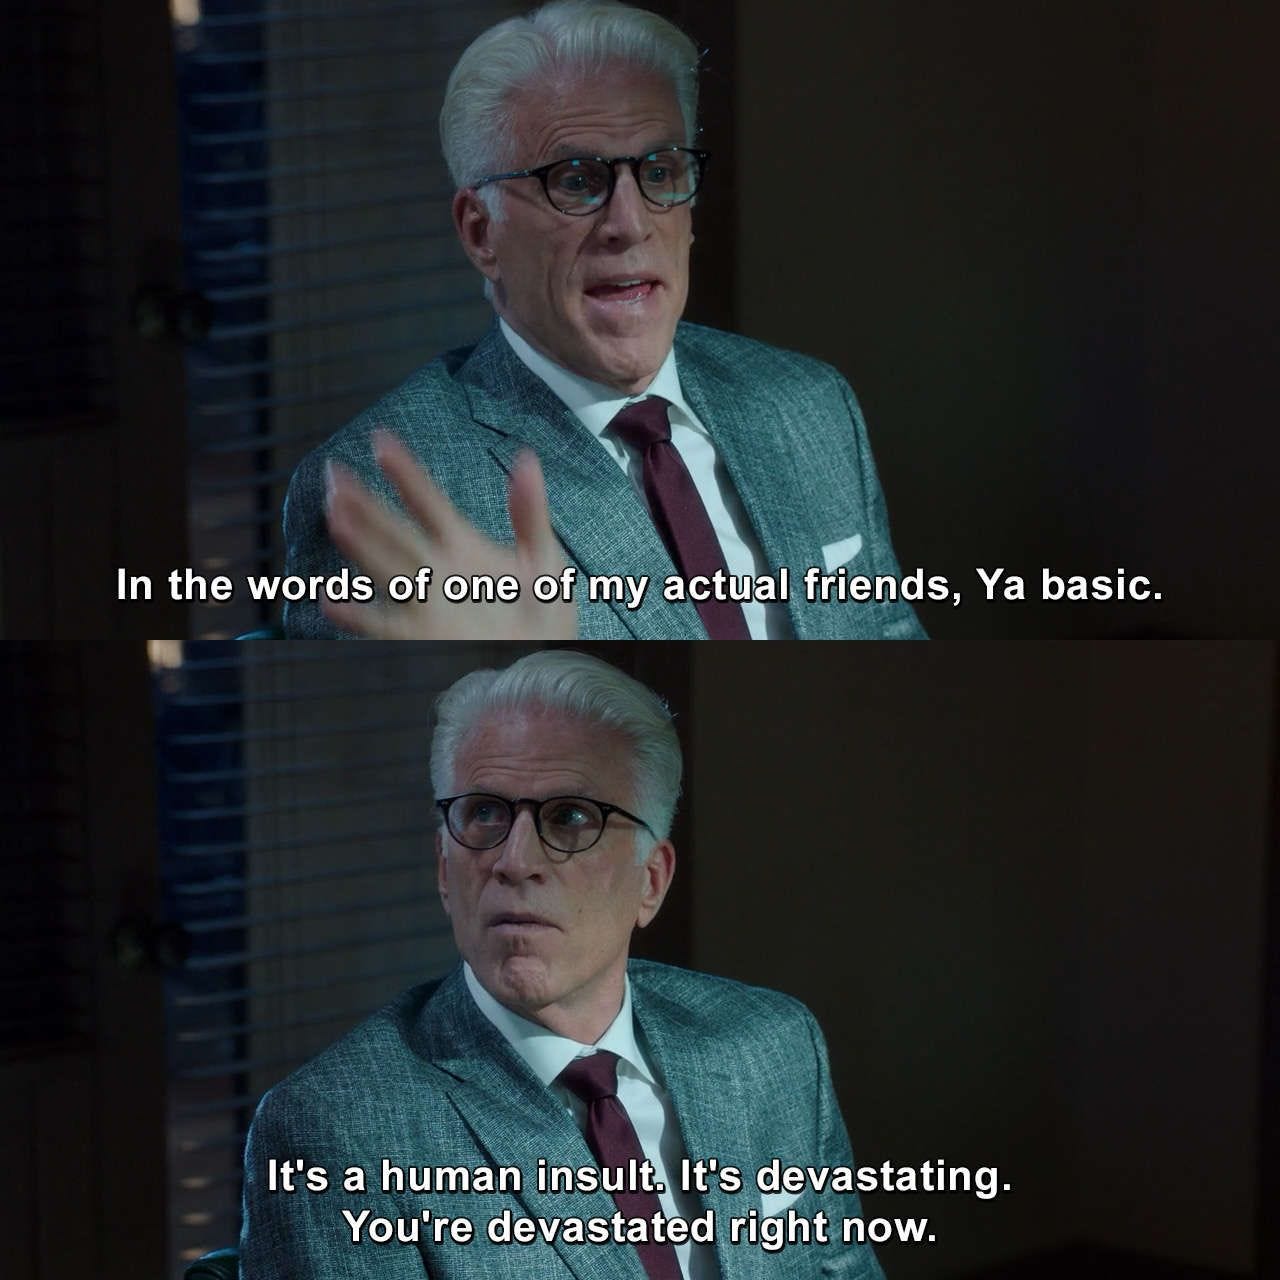 The Good Place - The Burrito #Michael #TheGoodPlace #TheBurrito #humor #meme  | Place quotes, The good place, Tv show quotes